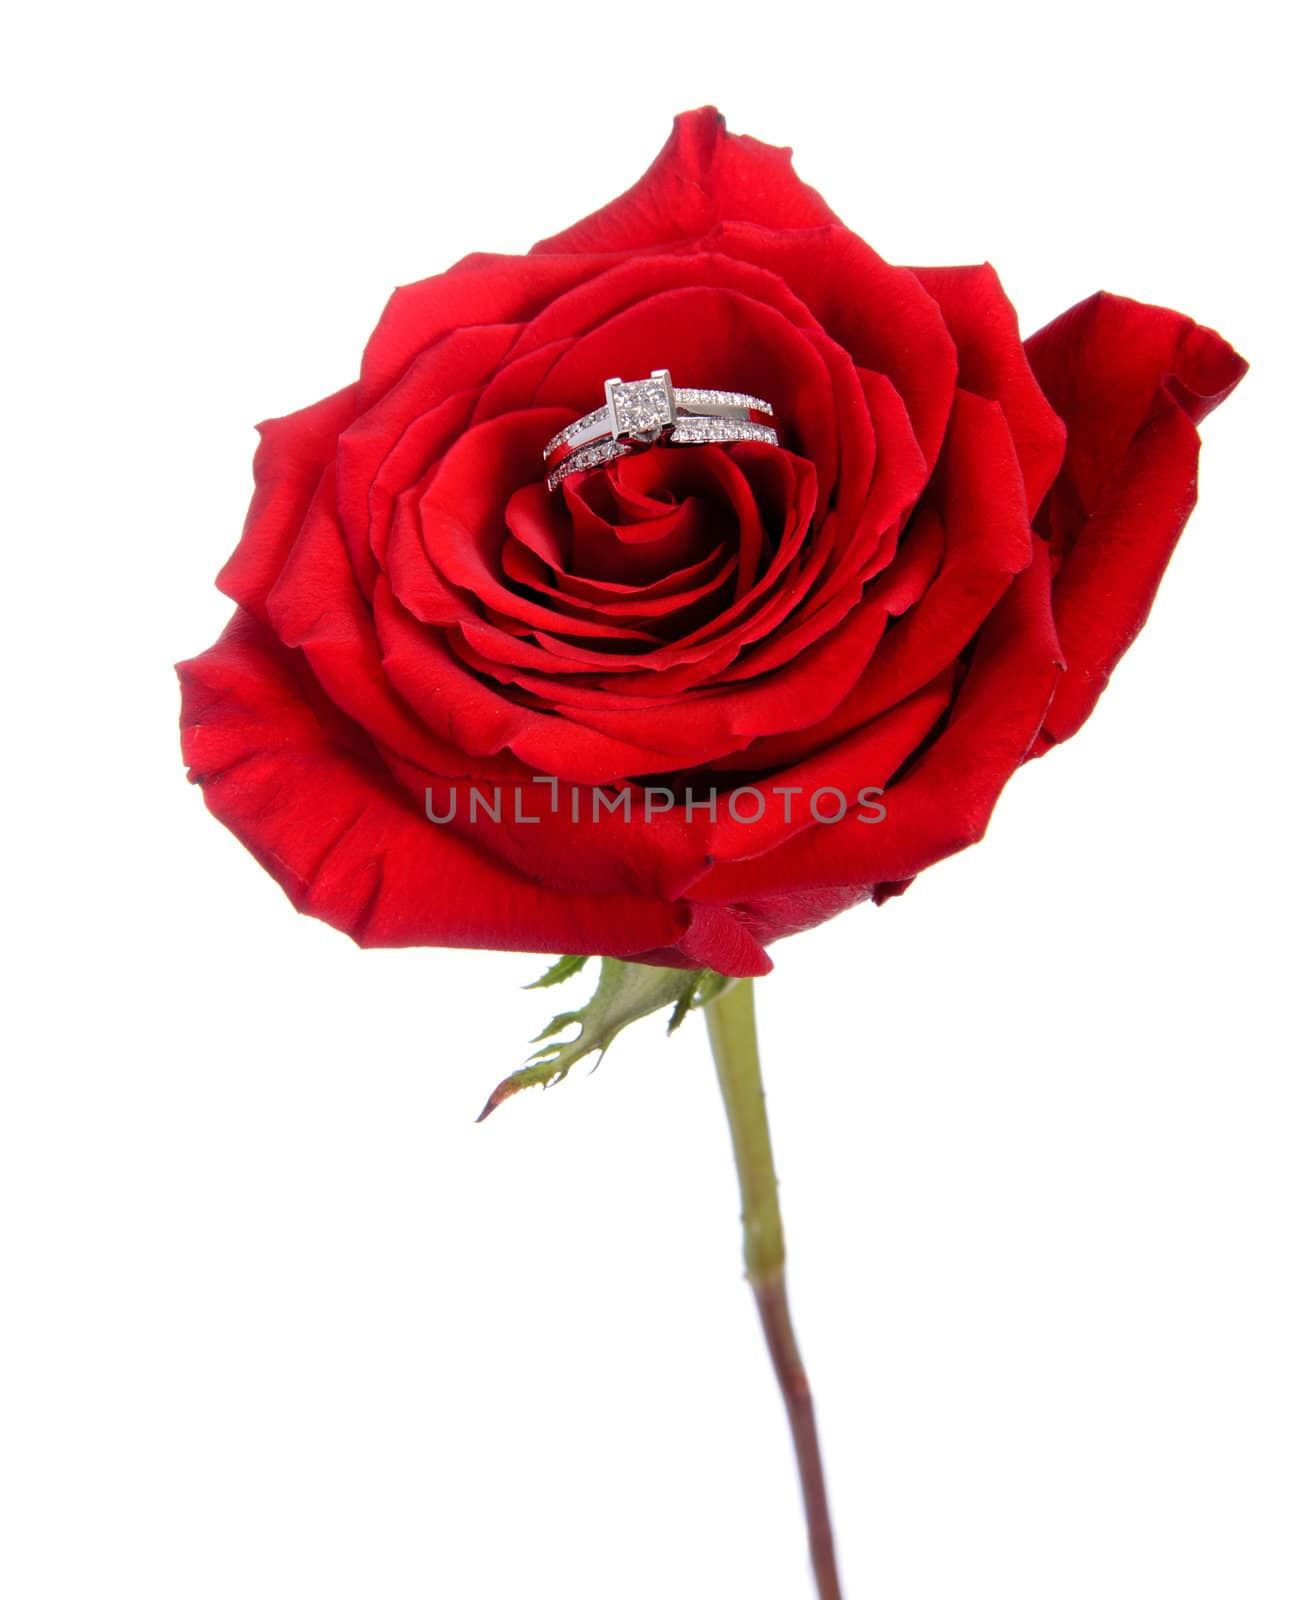 A diamond engagement ring resting in a red rose, isolated against a white background.